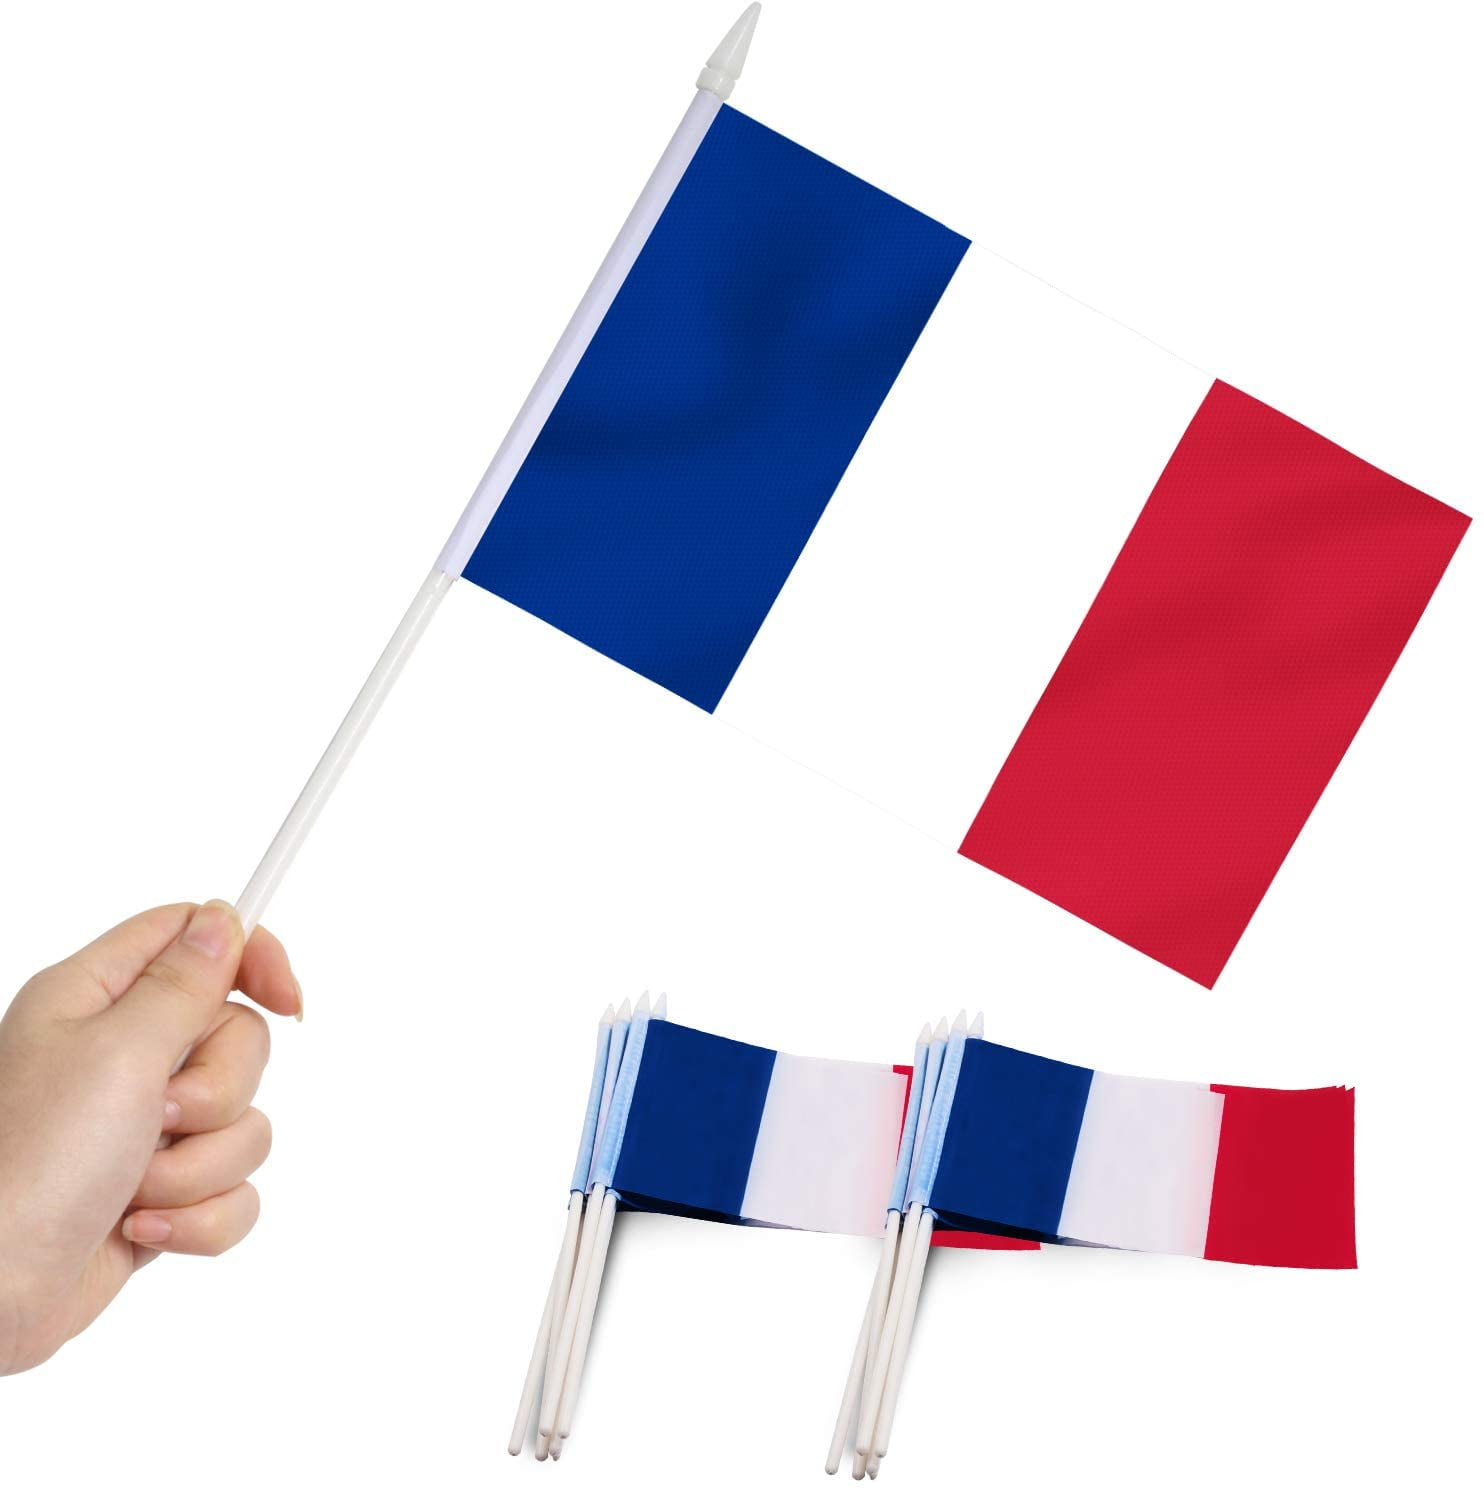 Free French France Resistance Flag License Plate 6 X 12 Inches New Aluminum 